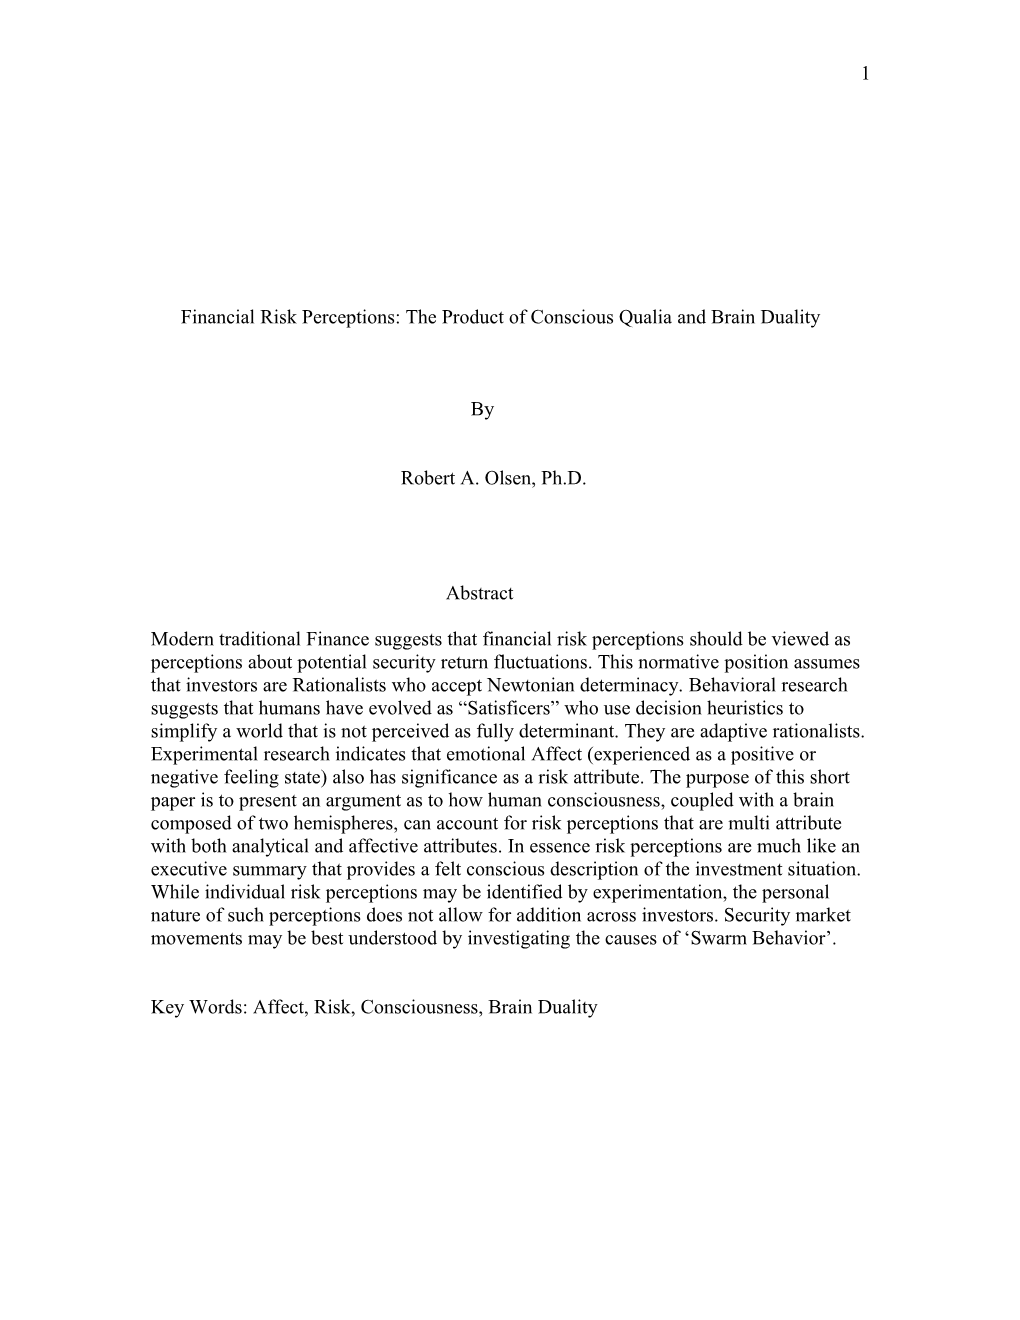 Financial Risk Perceptions: the Product of Conscious Qualia and Brain Duality